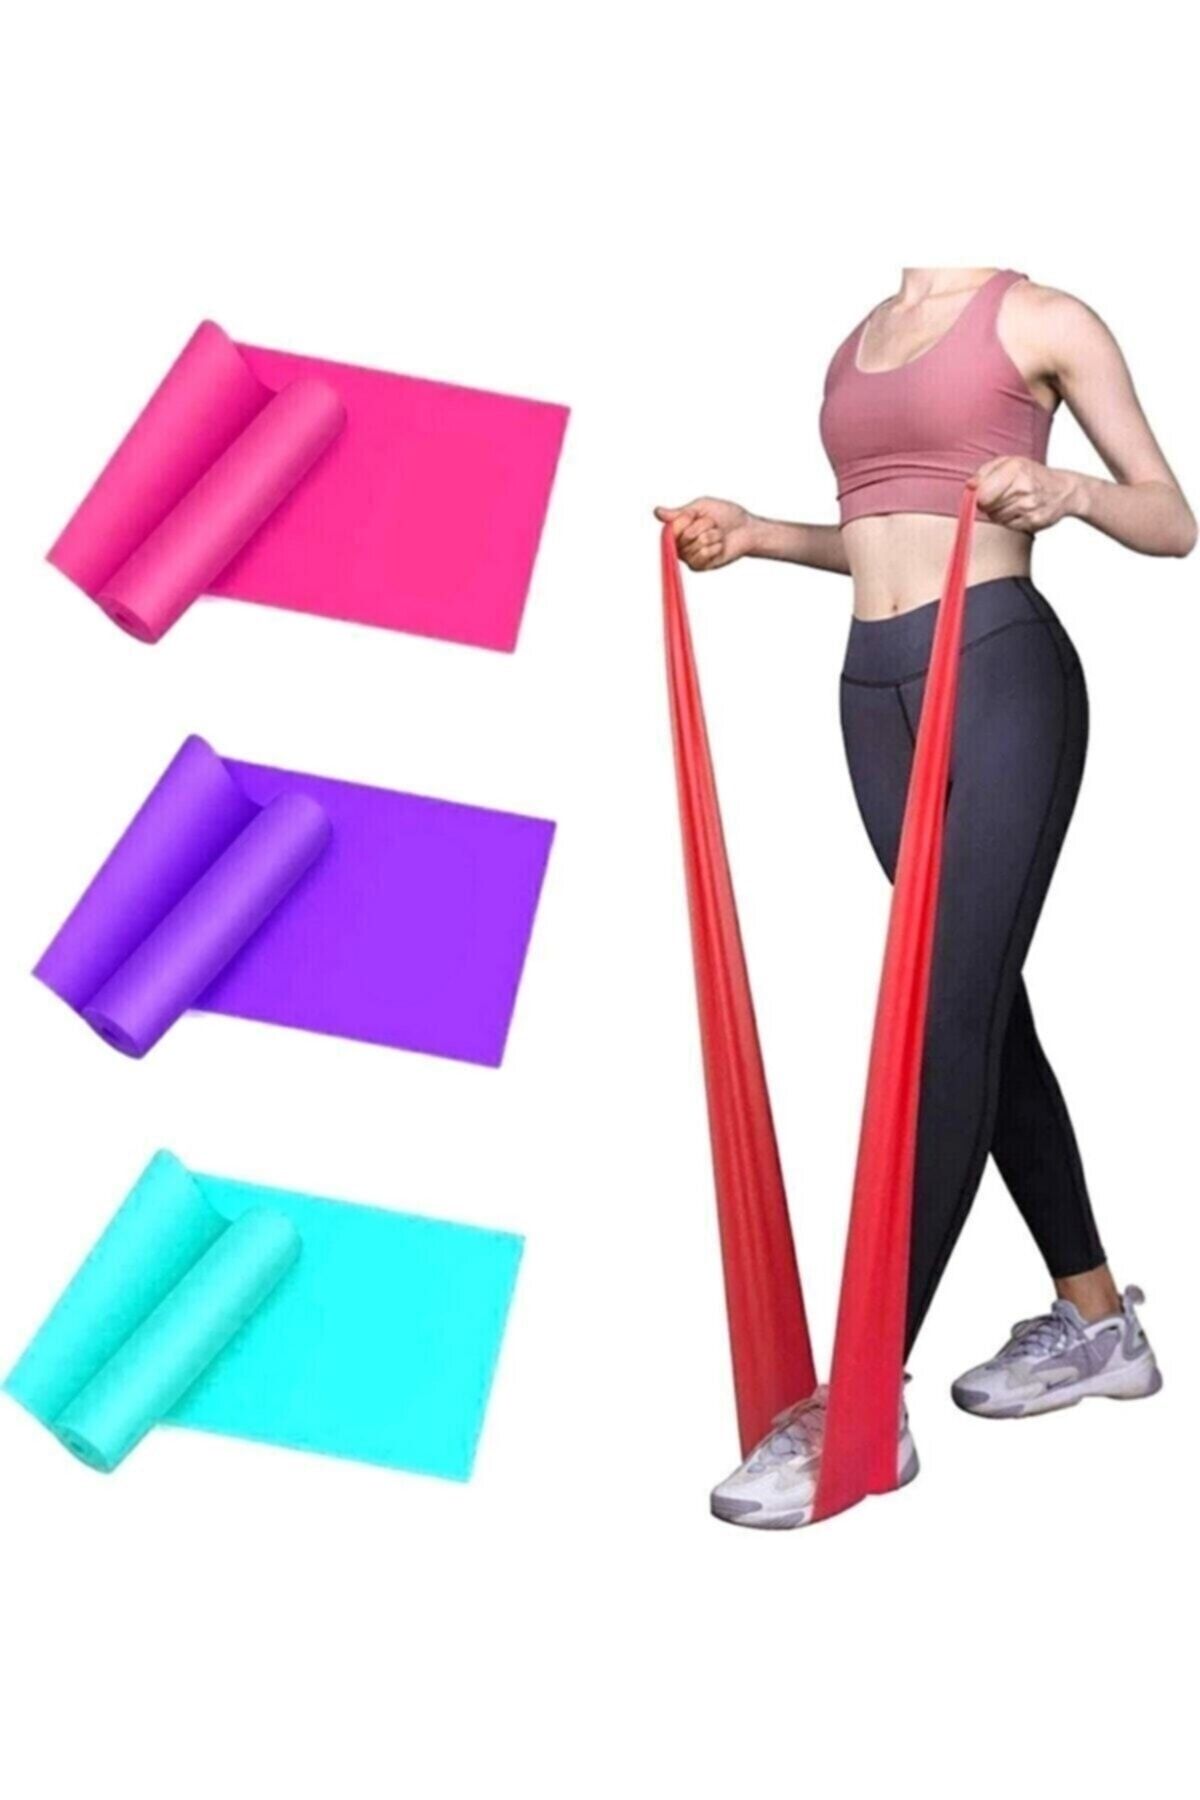 MultiFlexPro Pilates Band Set of 3 150x15 Cm Pilates Elastic Exercise  Aerobic Band with 3 Different Resistance Levels - Trendyol